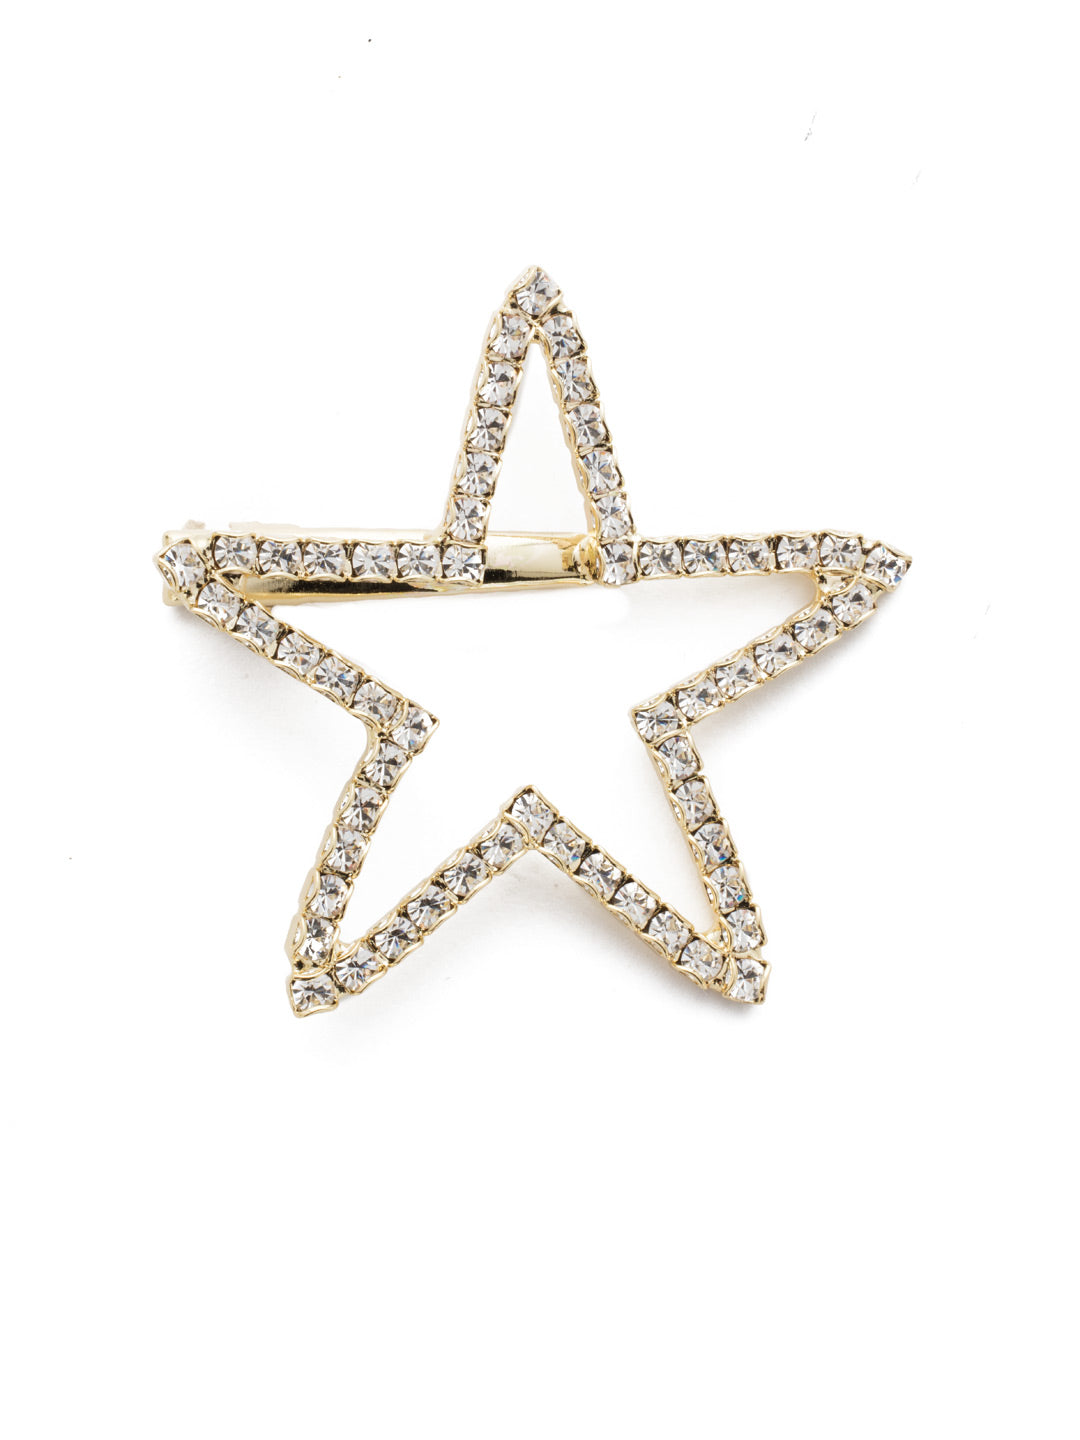 Starmont Barrette - HEE9BGCRY - <p>Shine bright with our Starmont Barrette- crystal rhinestone perfectly shaped into five point stars. From Sorrelli's Crystal collection in our Bright Gold-tone finish.</p>